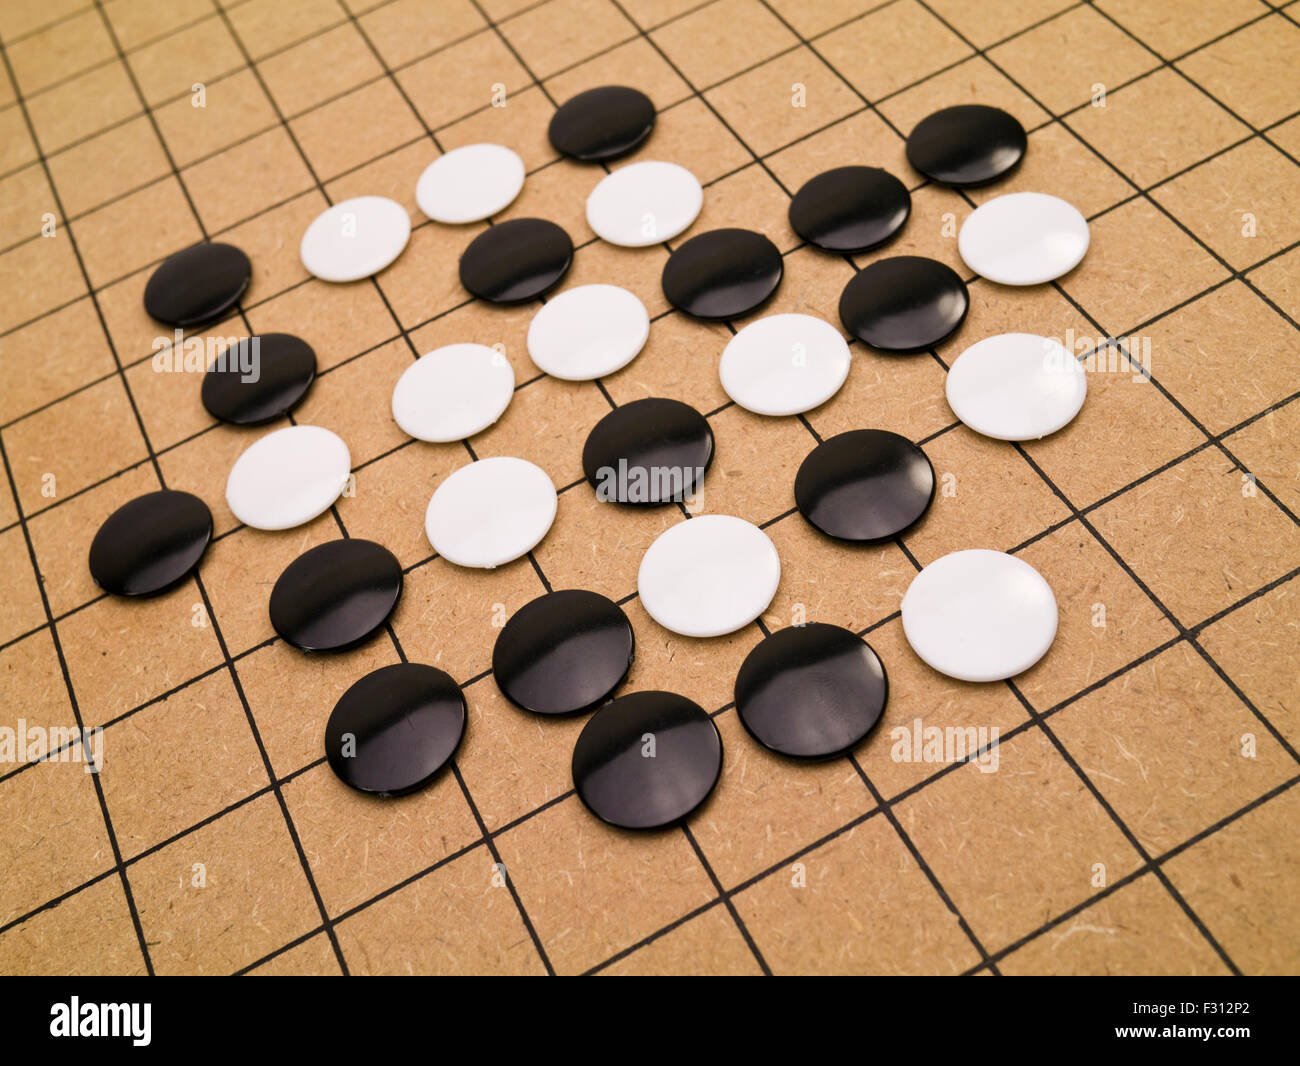 closeup view of stones on a Go board Stock Photo